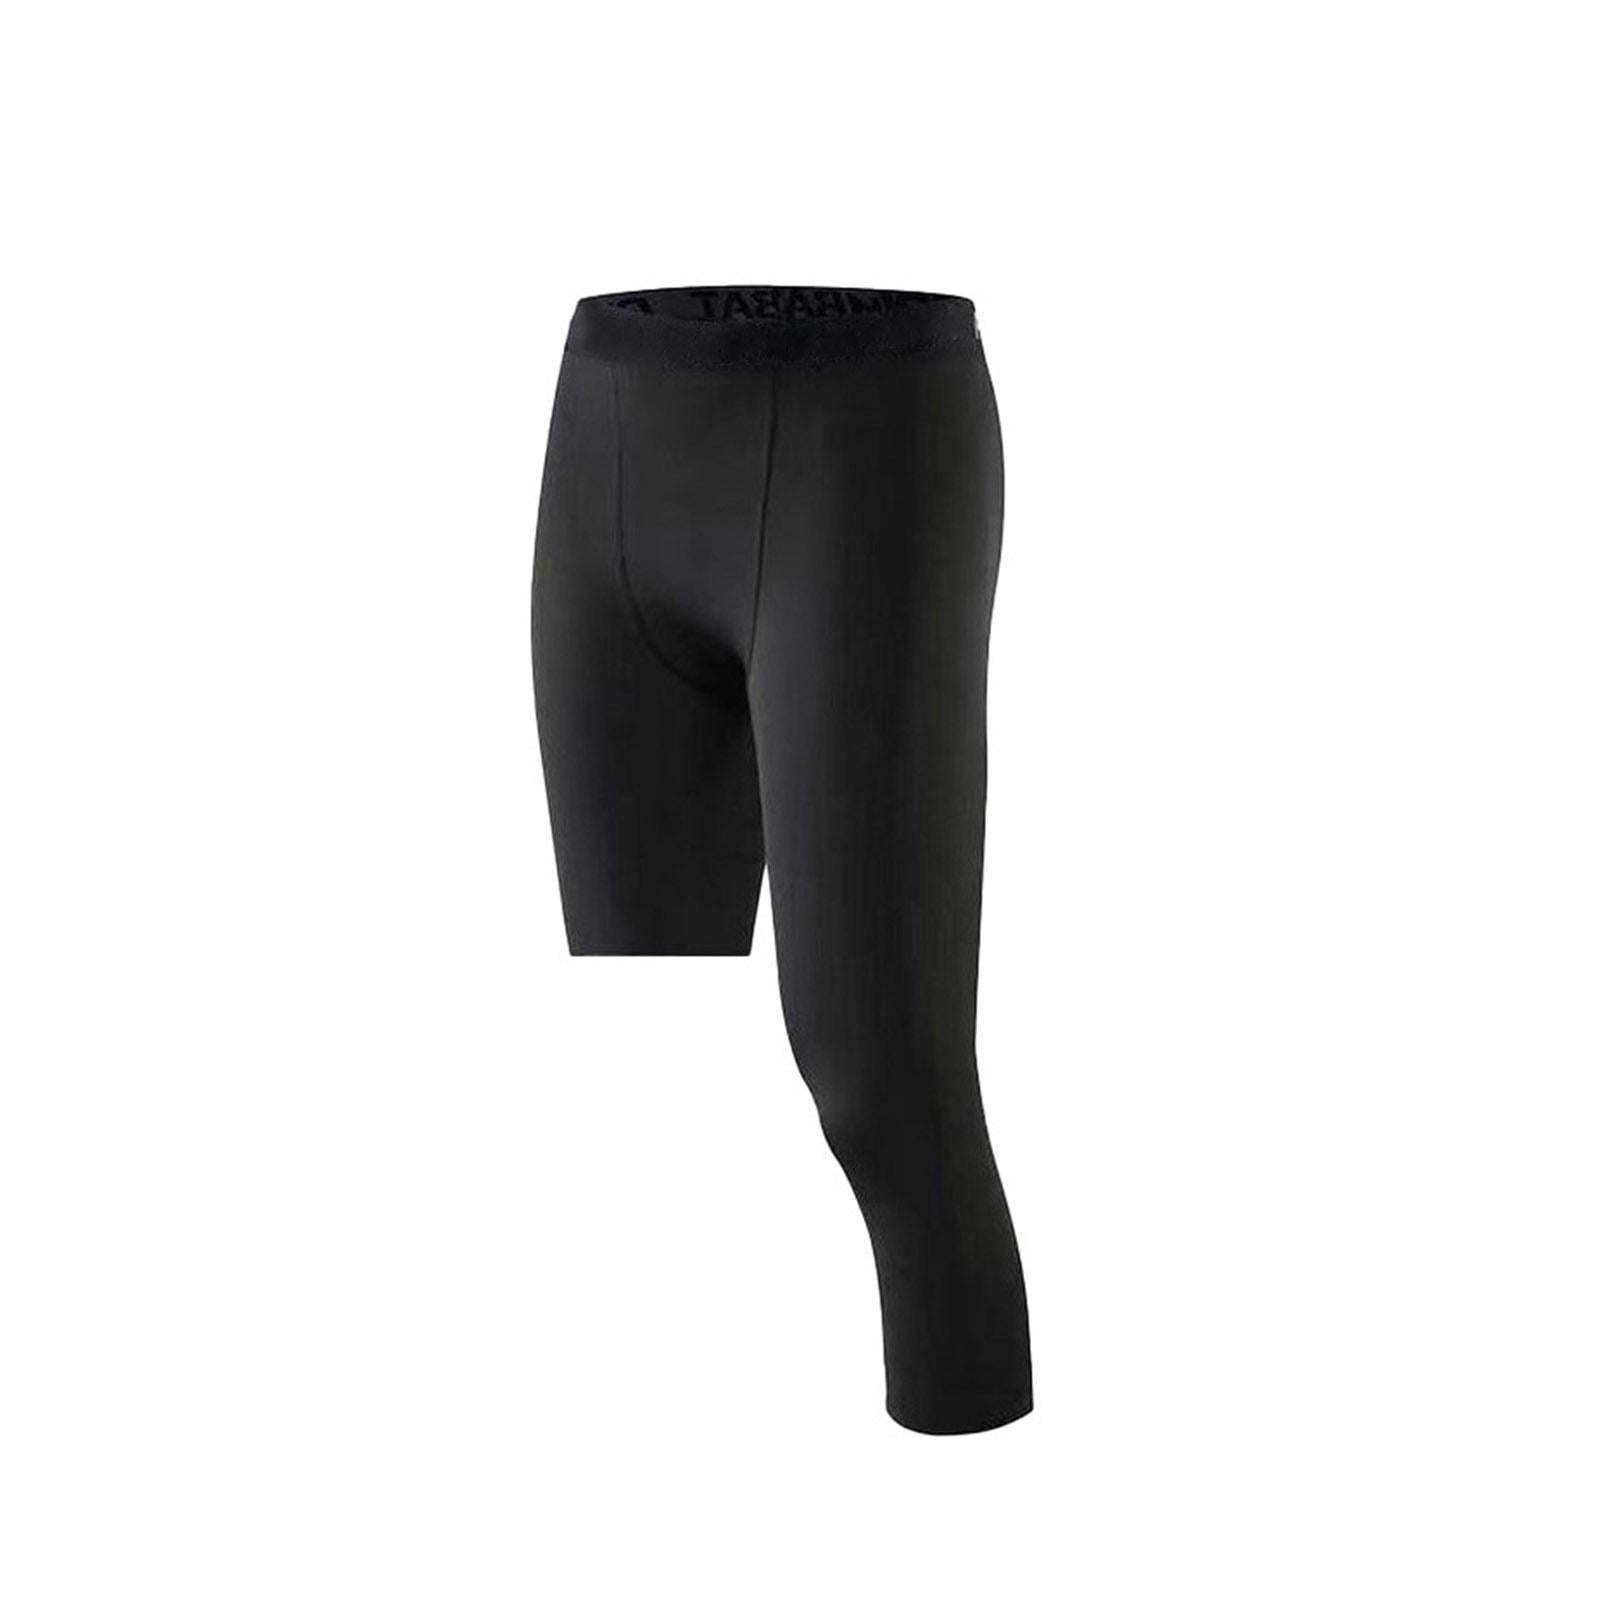 Details about   Plain Compression Leggings Running Basketball Pants3/4 Cropped Base Layers Tight 